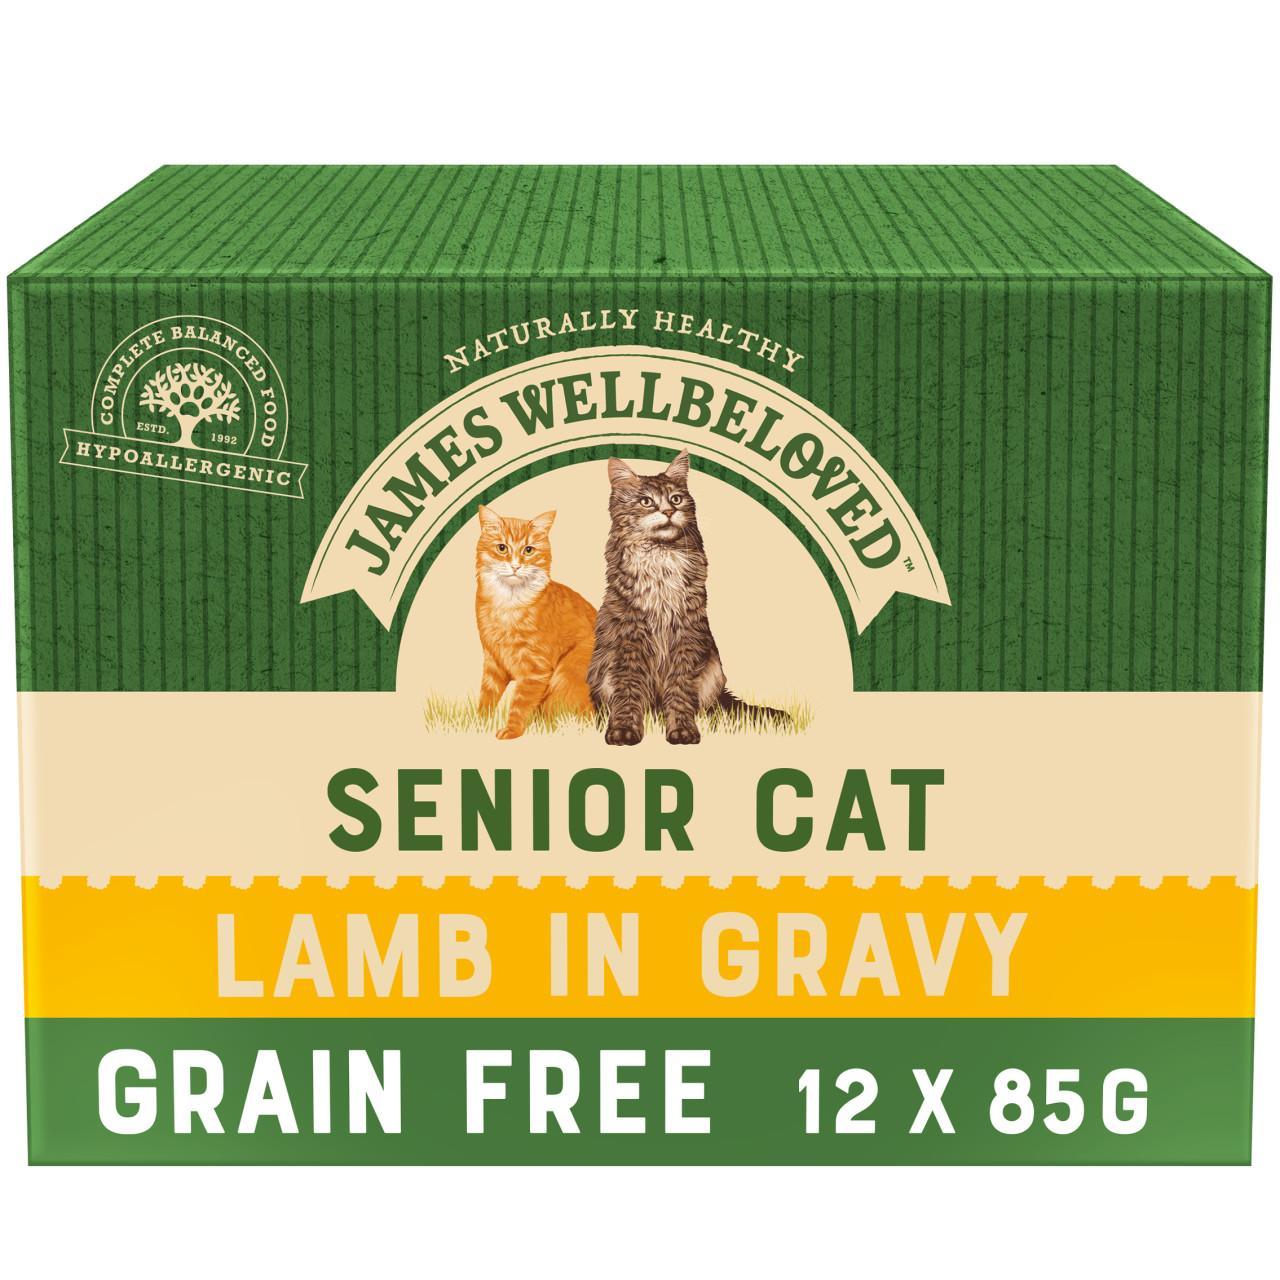 An image of James Wellbeloved Grain Free Senior Cat Lamb Pouches